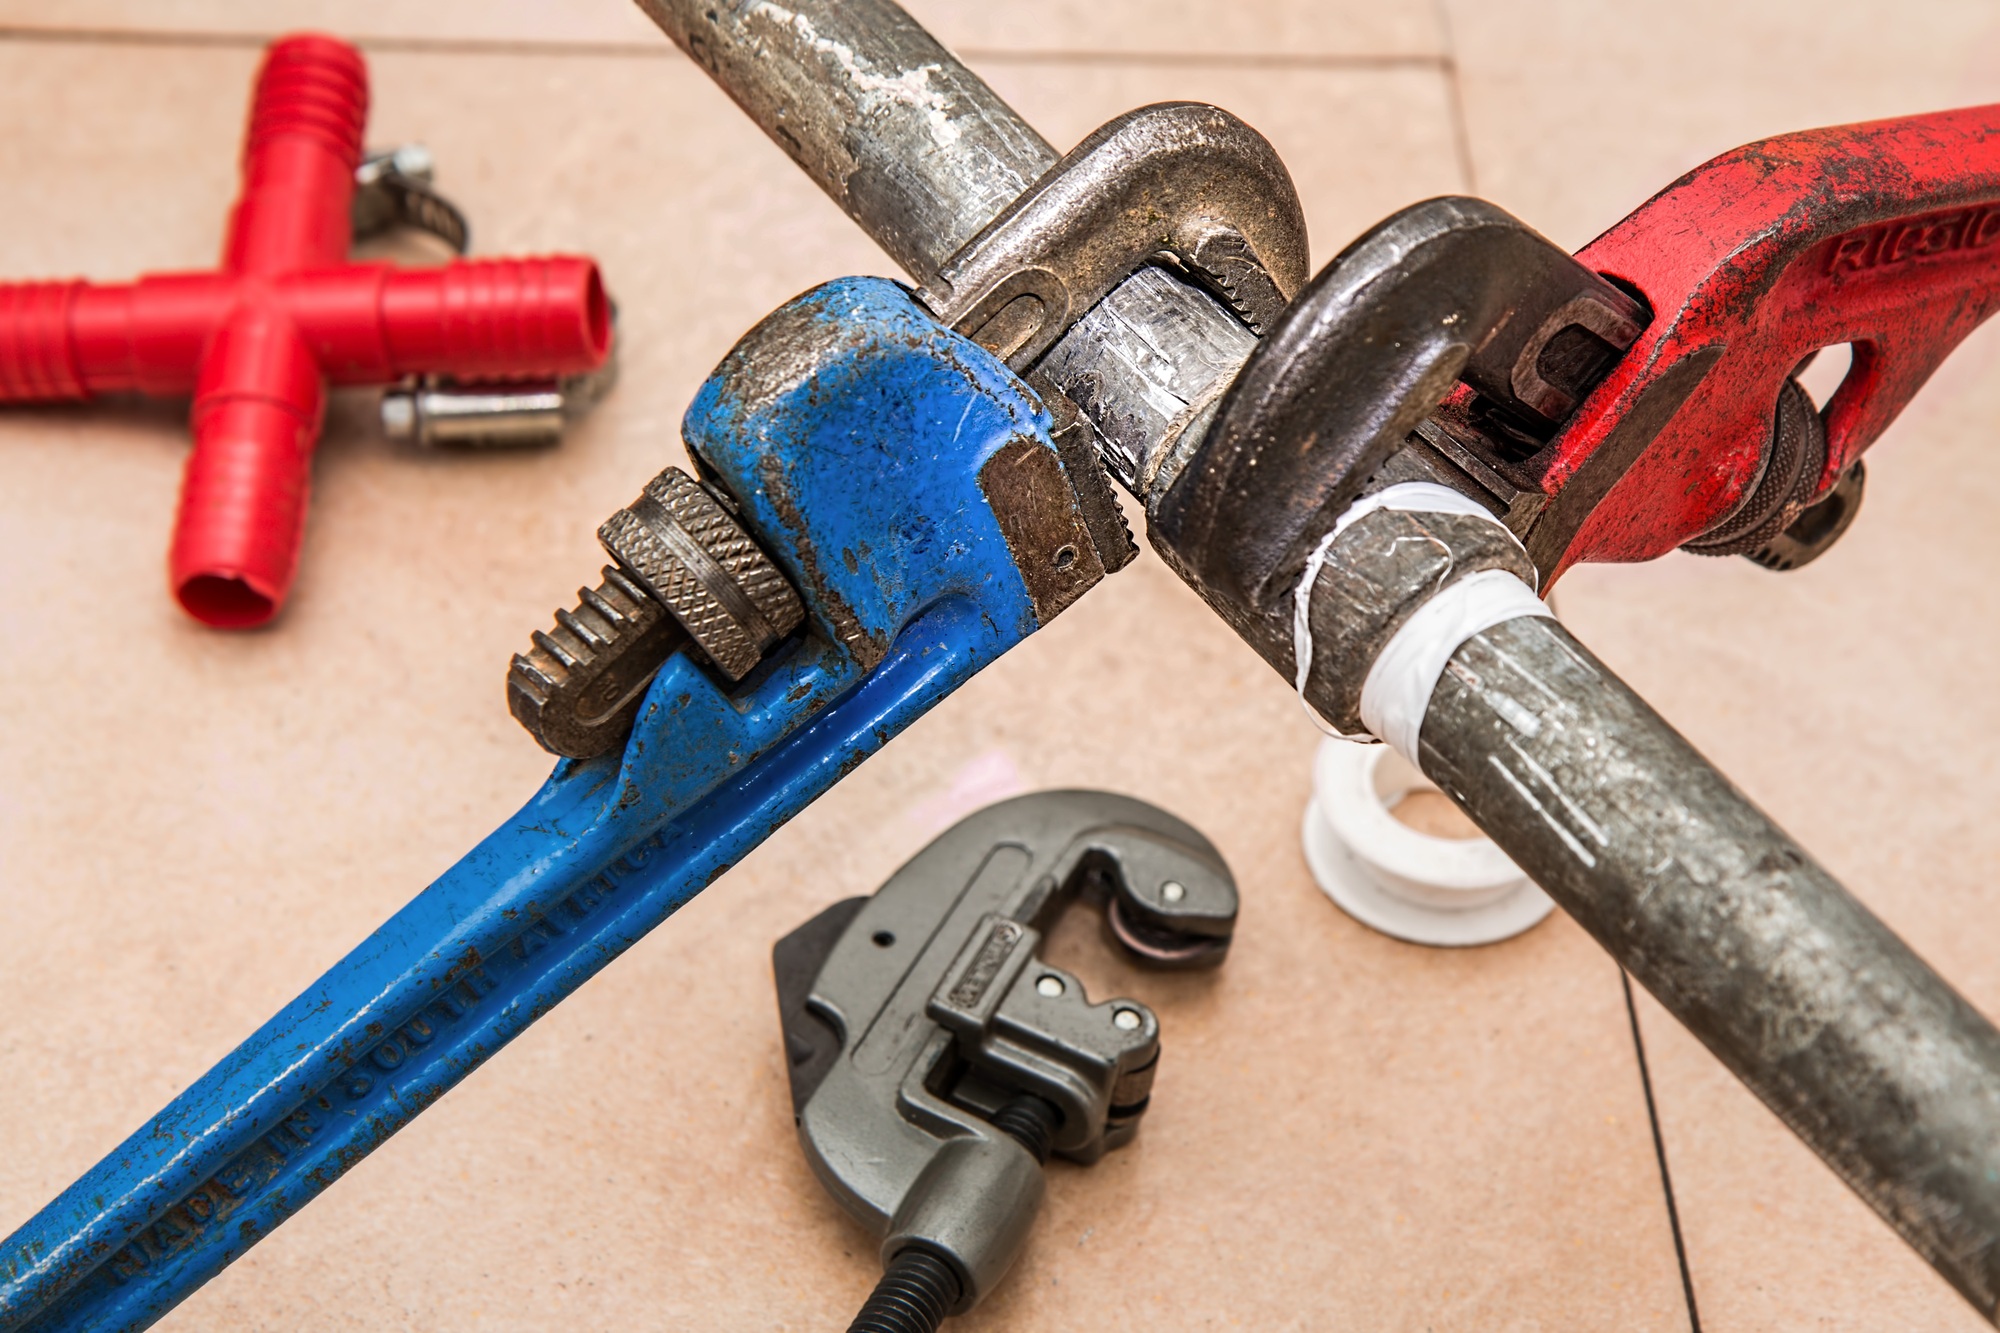 Some signs of a plumbing problem are more obvious than others. If you notice any of these 6 signs, then it's time to call a plumber immediately.